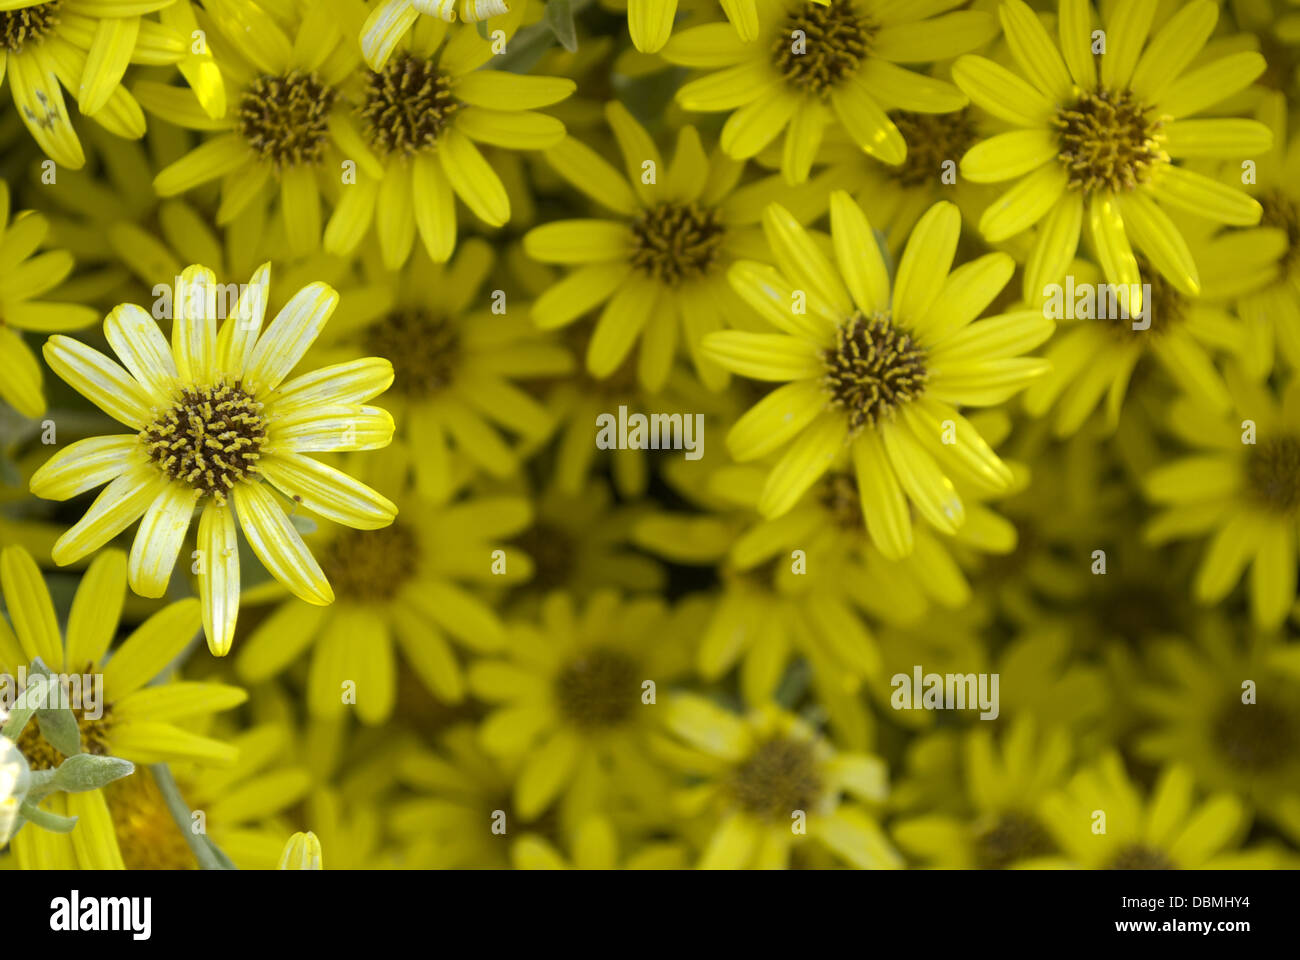 Flower with yelow and white petals Stock Photo